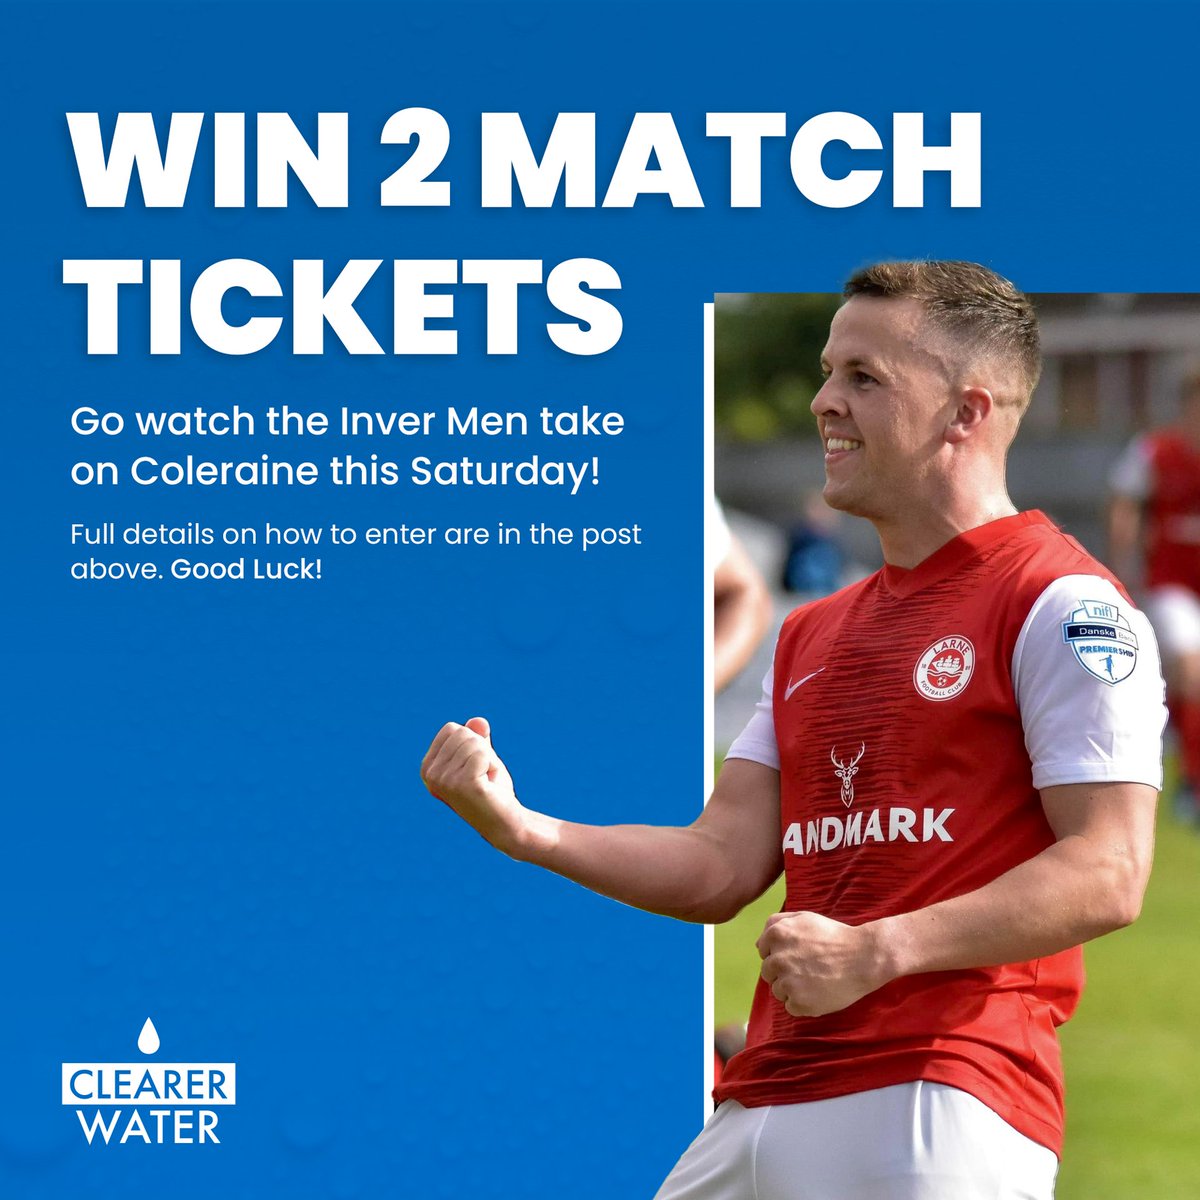 𝗪𝗜𝗡 𝗧𝗪𝗢 𝗧𝗜𝗖𝗞𝗘𝗧𝗦! ⚽️ Who wants two tickets for our Hydration Partner @larnefc's match on Saturday at Inver Park? 🙋 To be in with a chance of winning 👇🏼 Go check out our Facebook page - bit.ly/cwfbc The winner will be announced on Friday Afternoon. 👀